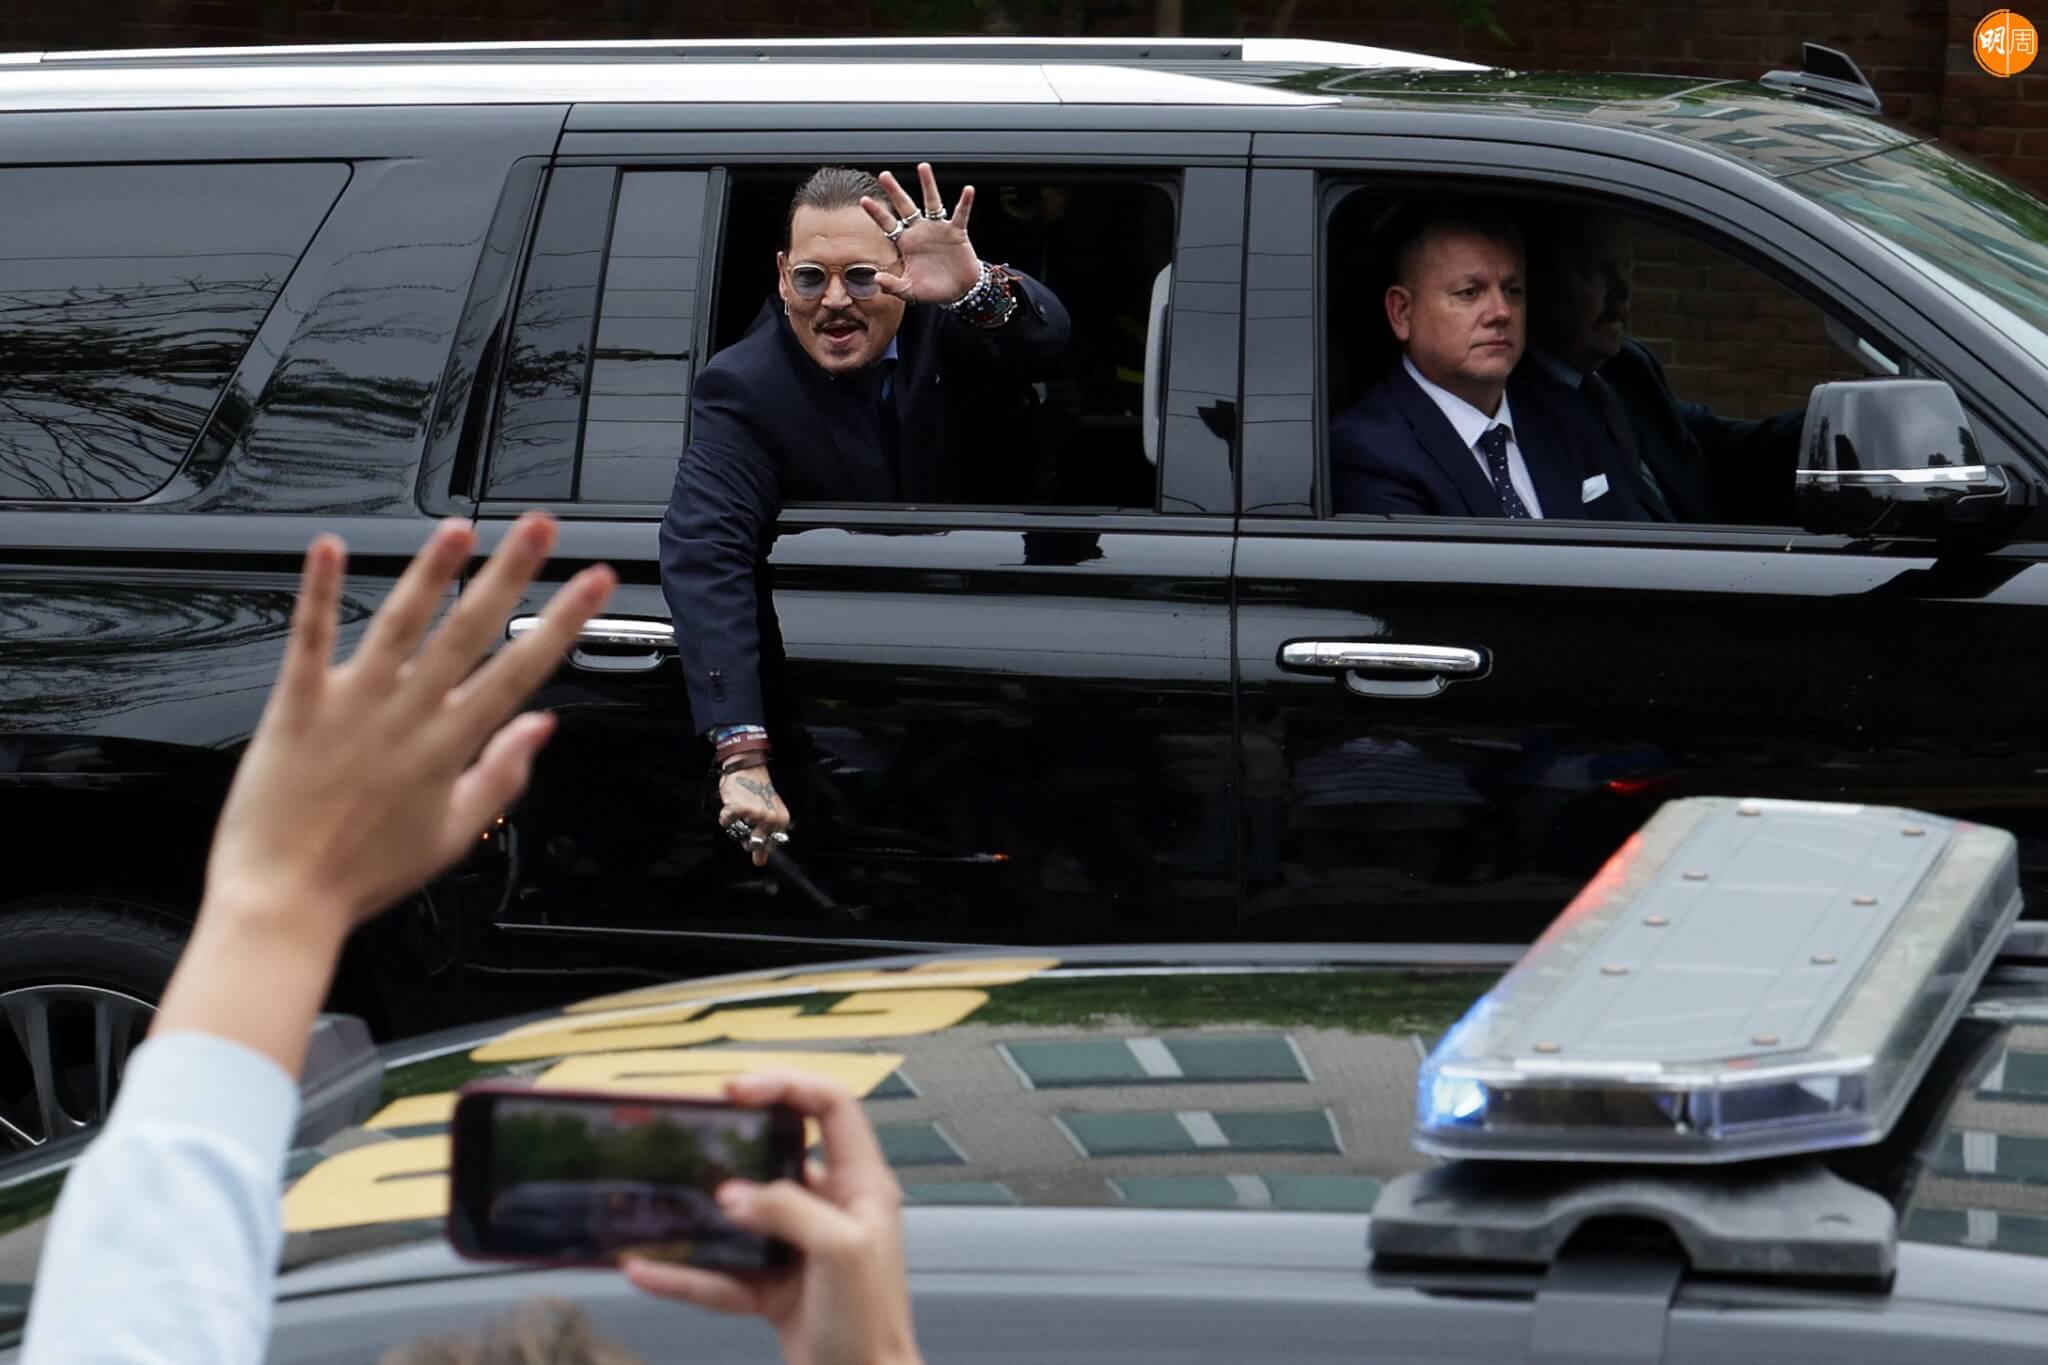 FAIRFAX, VIRGINIA - MAY 27: Actor Johnny Depp waves to supporters from his vehicle as he leaves a Fairfax County Courthouse May 27, 2022 in Fairfax, Virginia. The jury has started deliberation in the Depp v. Heard defamation trial, brought by Johnny Depp against his ex-wife Amber Heard. Alex Wong/Getty Images/AFP (Photo by ALEX WONG / GETTY IMAGES NORTH AMERICA / Getty Images via AFP)